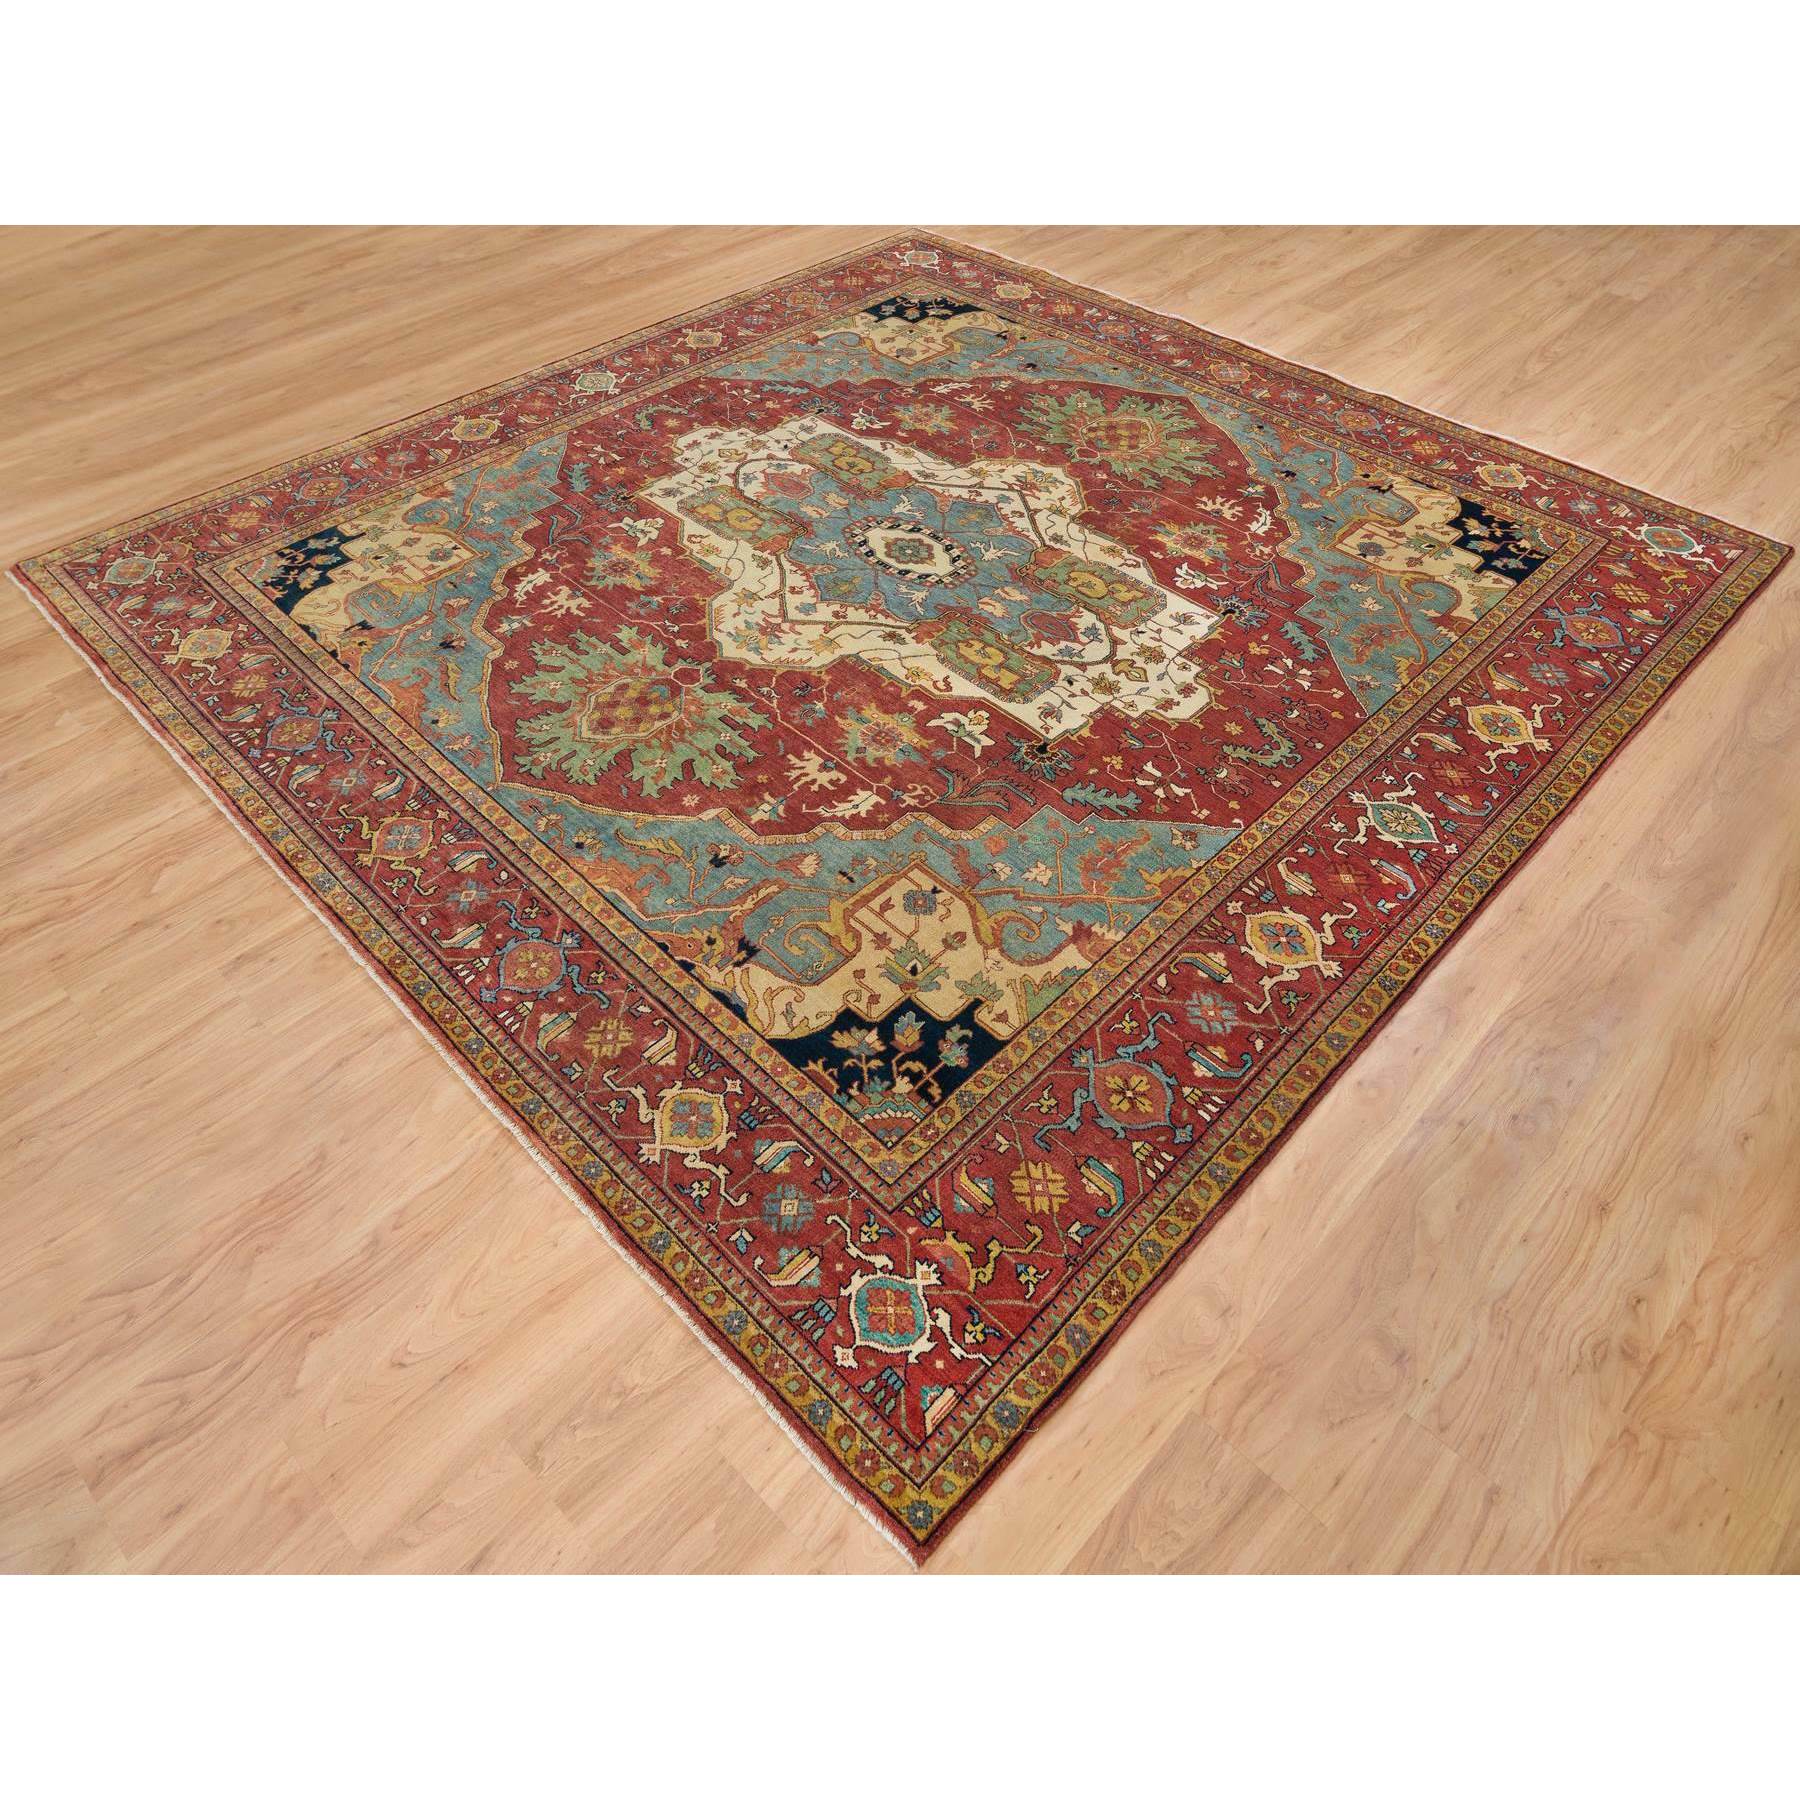 9'8"x10'1" Terracotta Red, Soft Wool, Antiqued Fine Heriz Re-Creation, Natural Dyes, Hand Woven, Densely Woven, Square Oriental Rug 